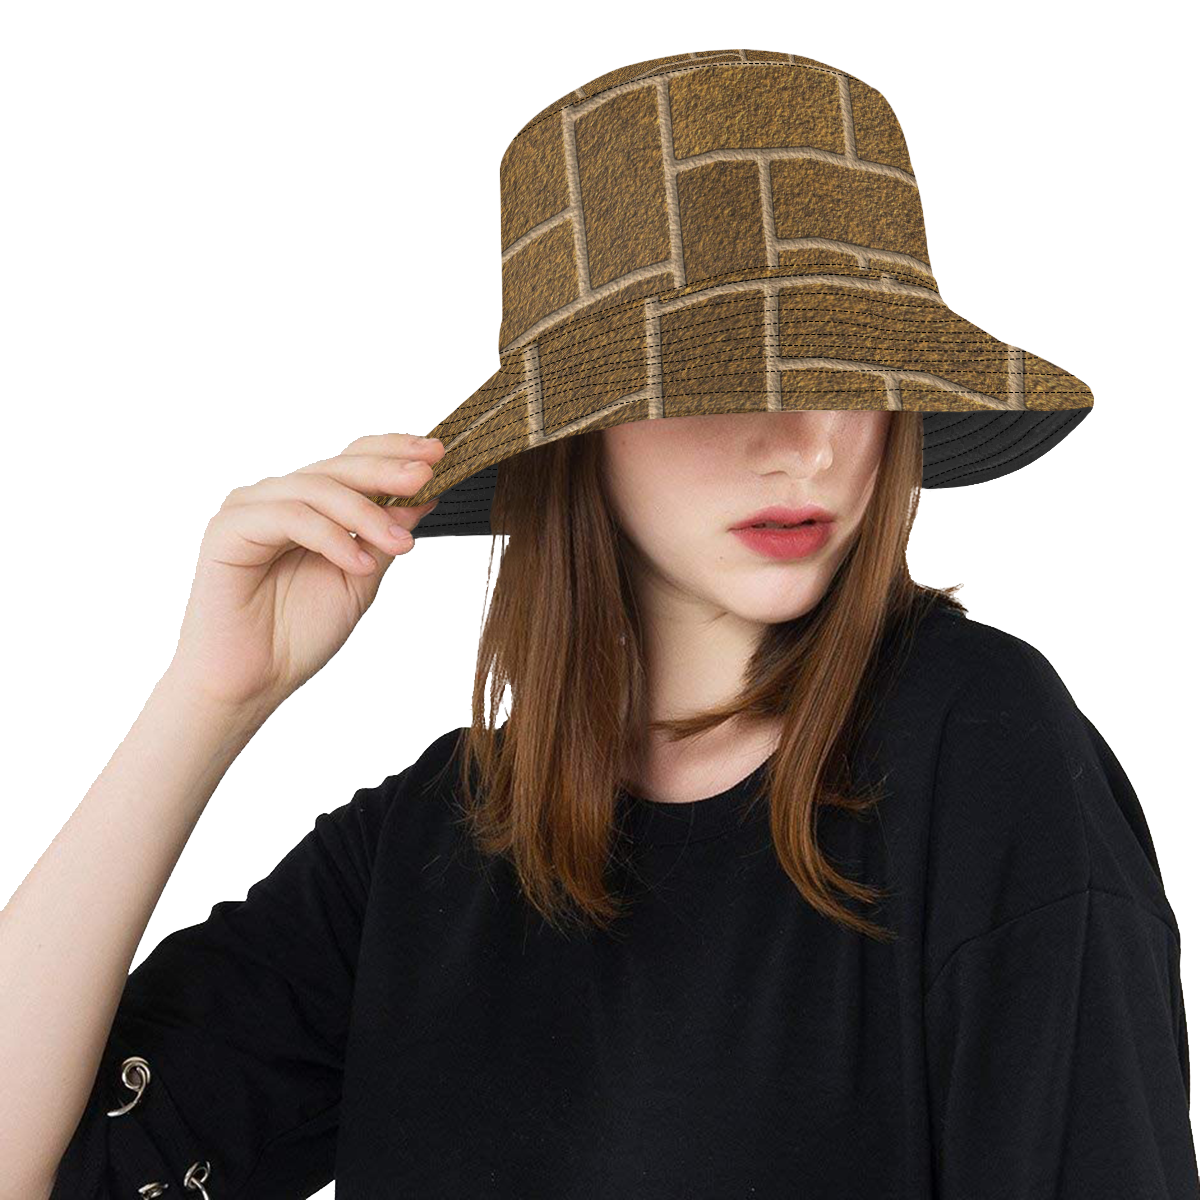 Gold Flaked Bricks All Over Print Bucket Hat